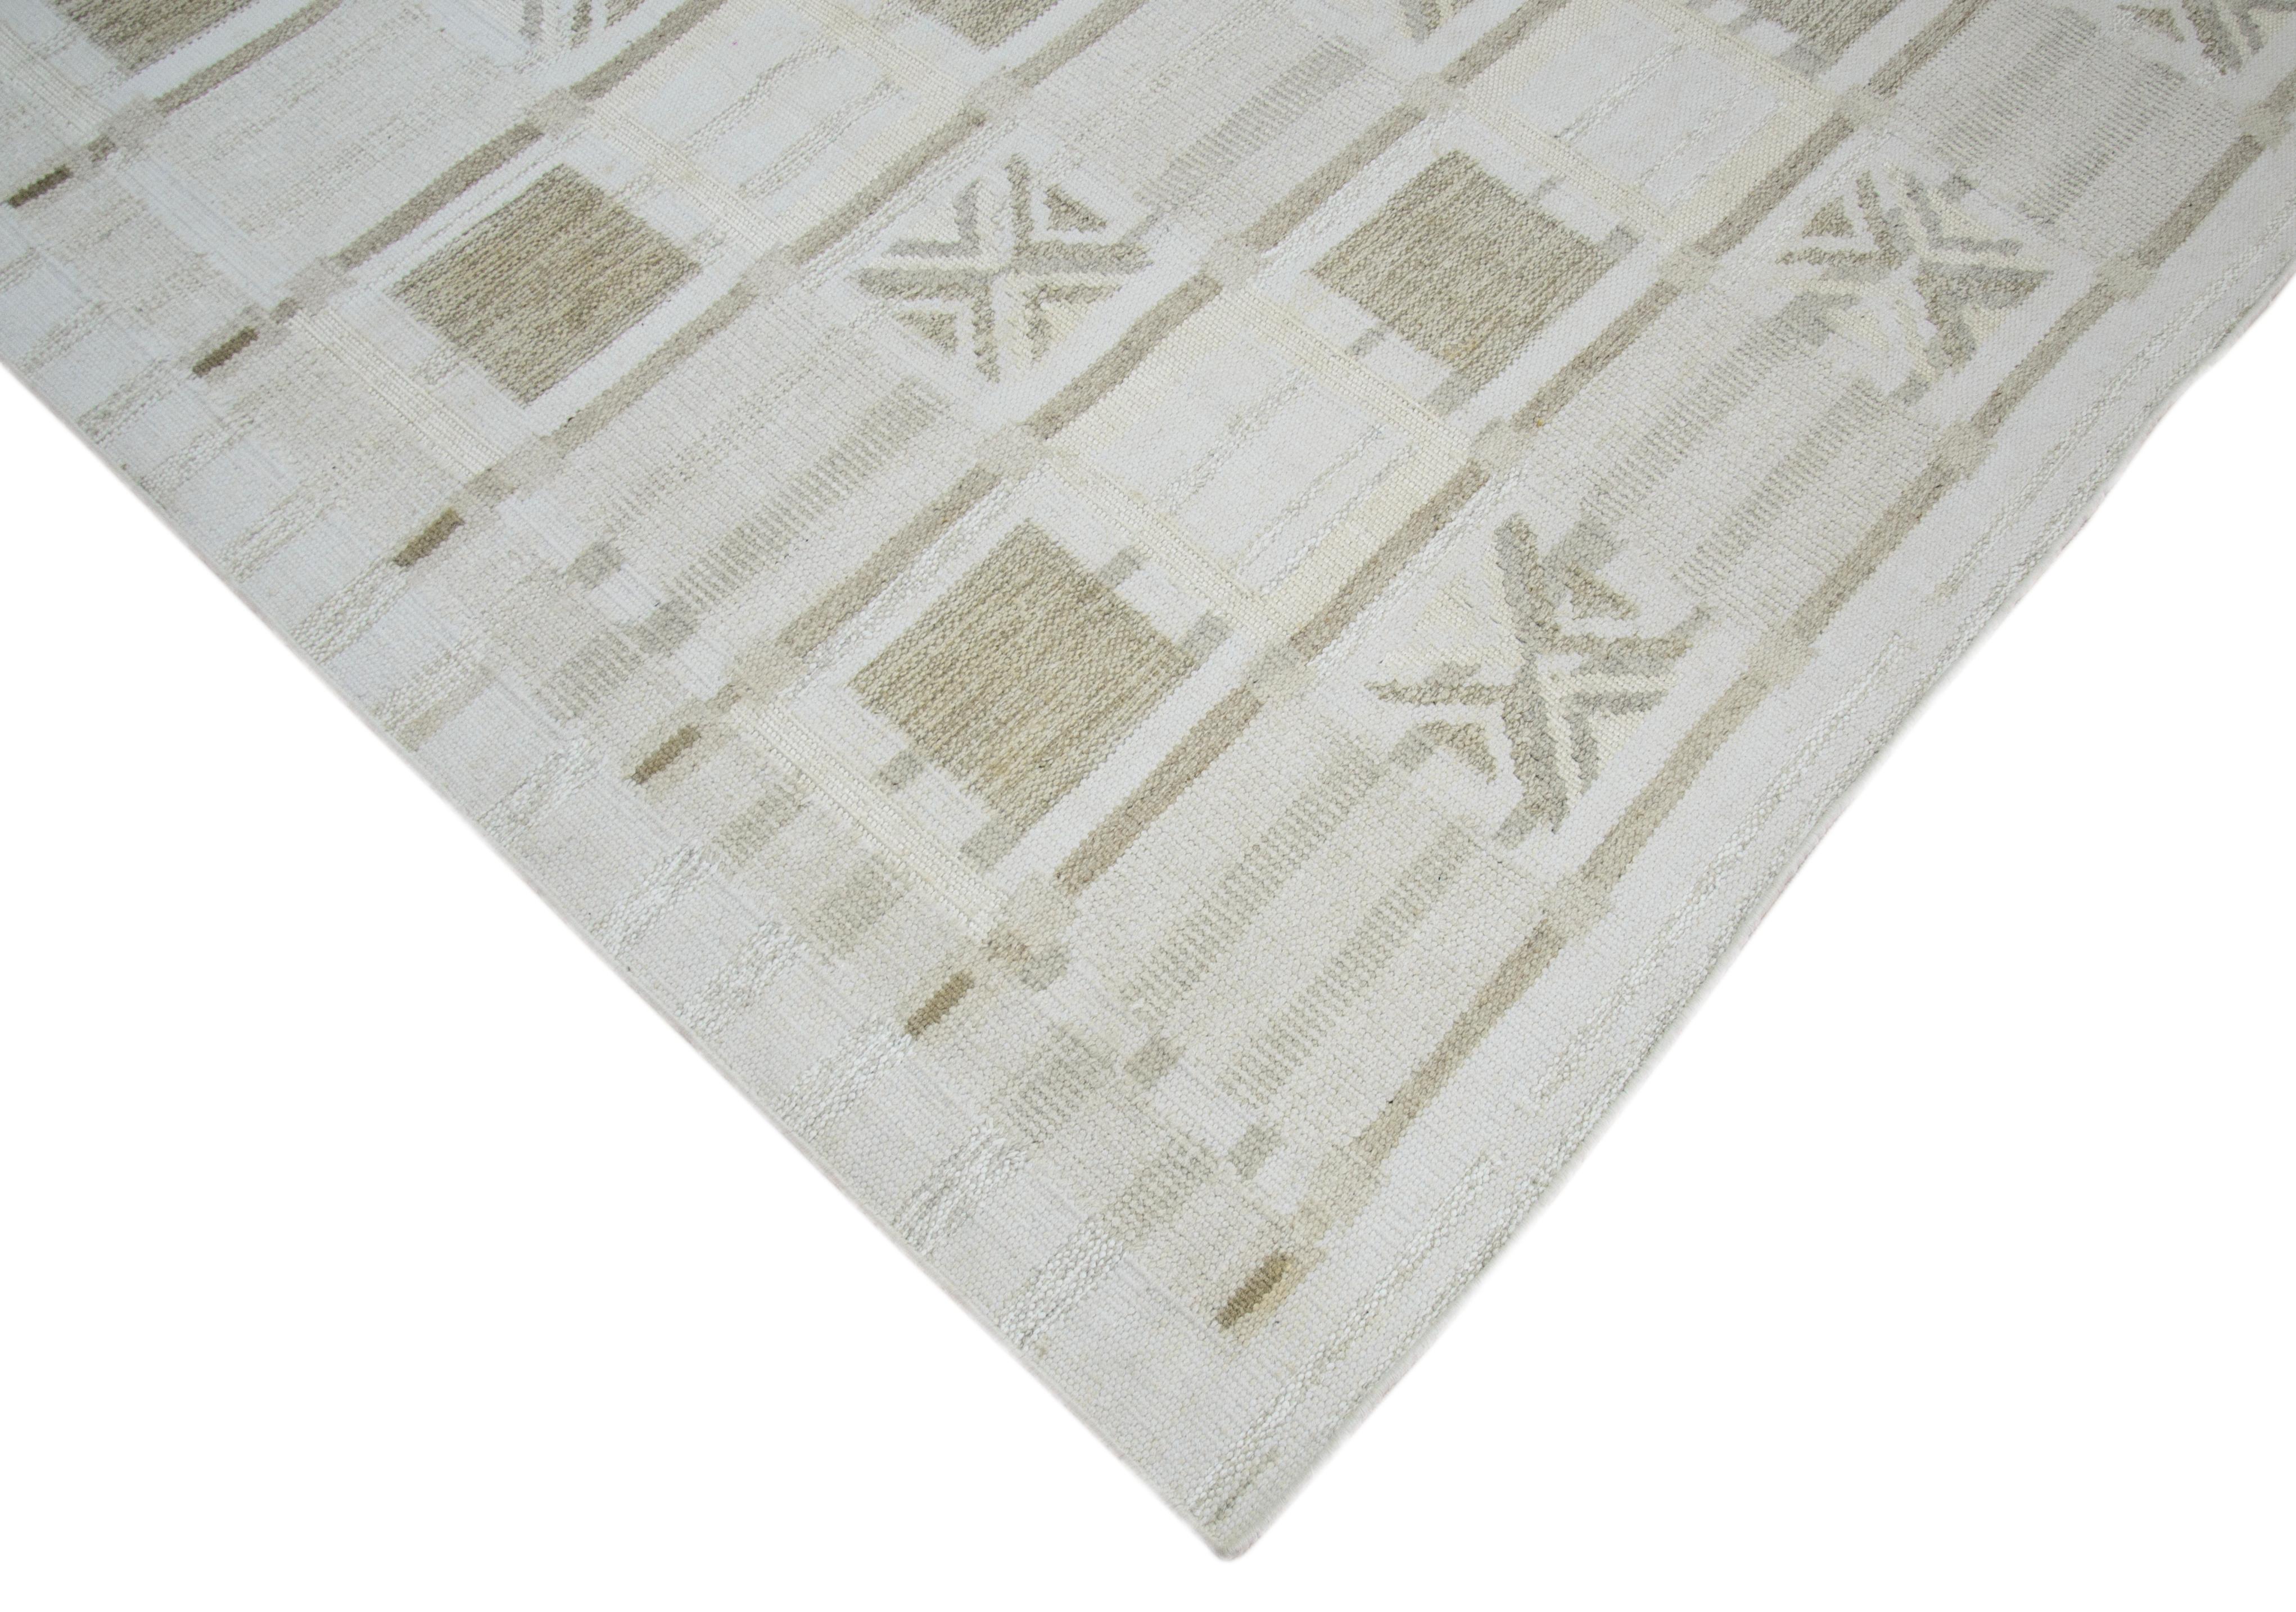 Modern area rug handwoven in Scandinavian design using fine wool and organic dyes. It features an exquisite white field with checkered patterns in gray and ivory mimicking a chess board design. This piece will surely look fabulous in modern and